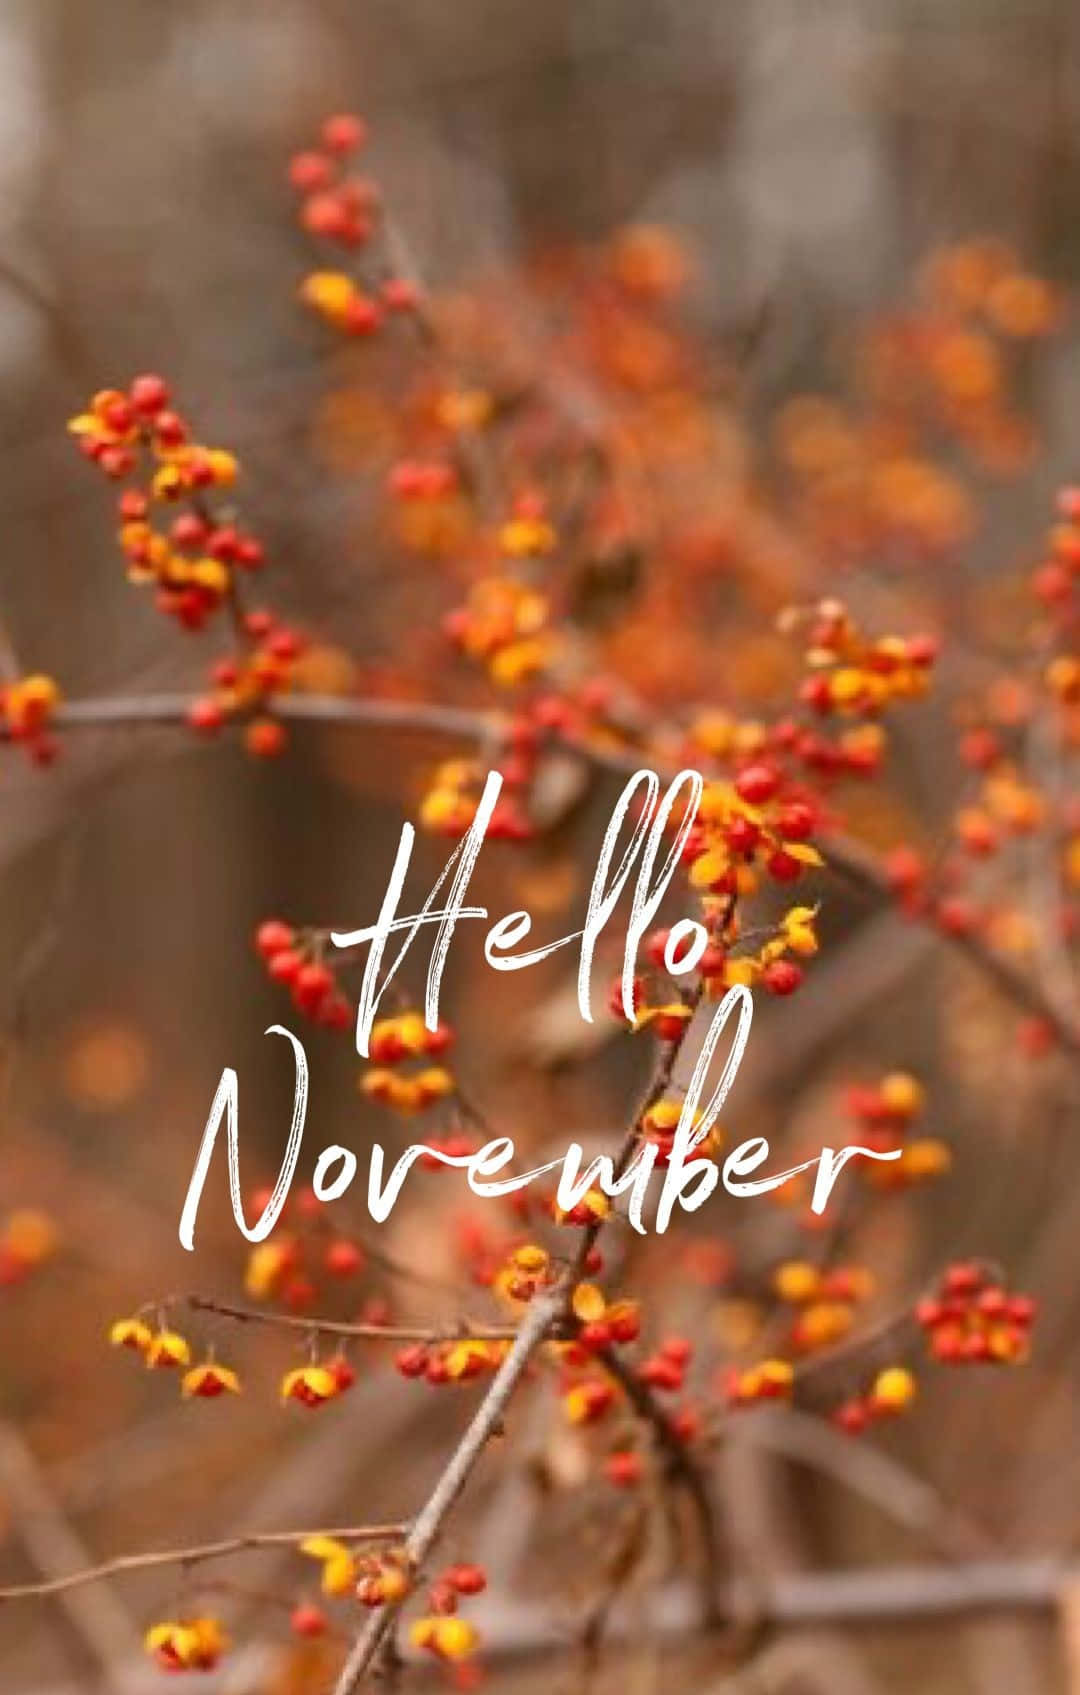 "Welcome to November - the Month of Thankfulness".